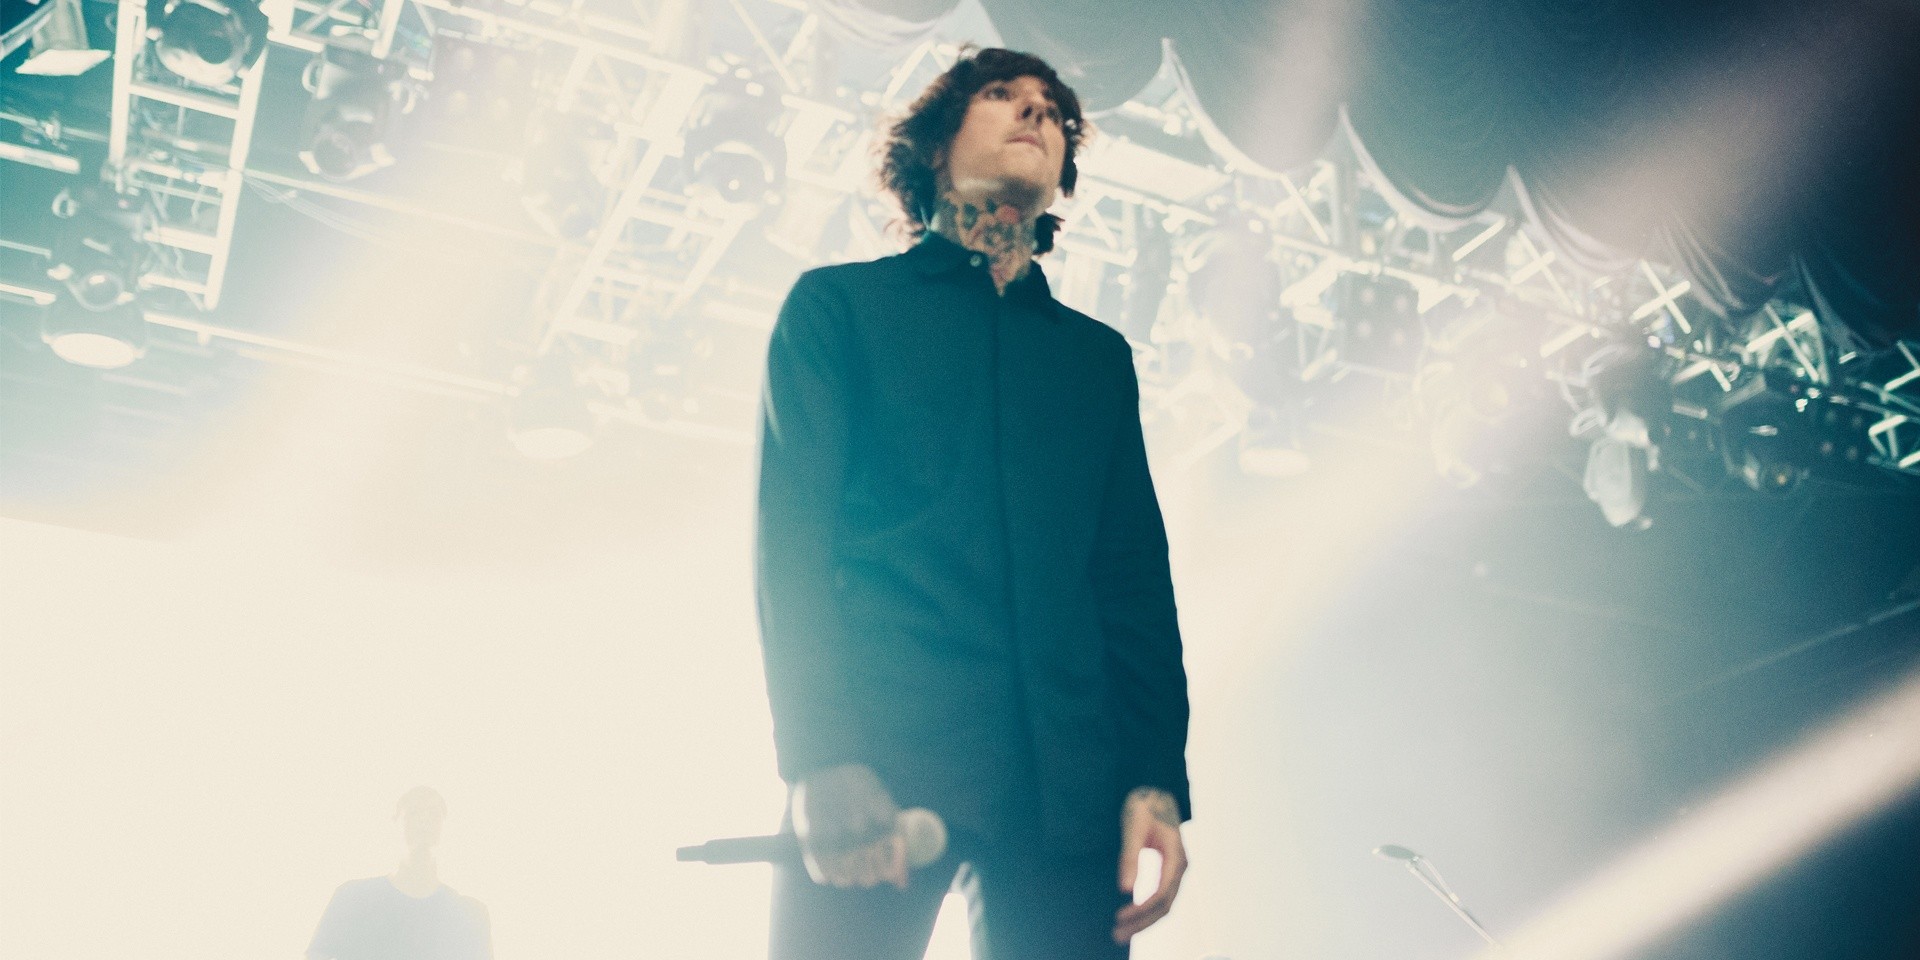 GIG REPORT: Sheffield behemoths Bring Me The Horizon ramp up with theatrical spectacle